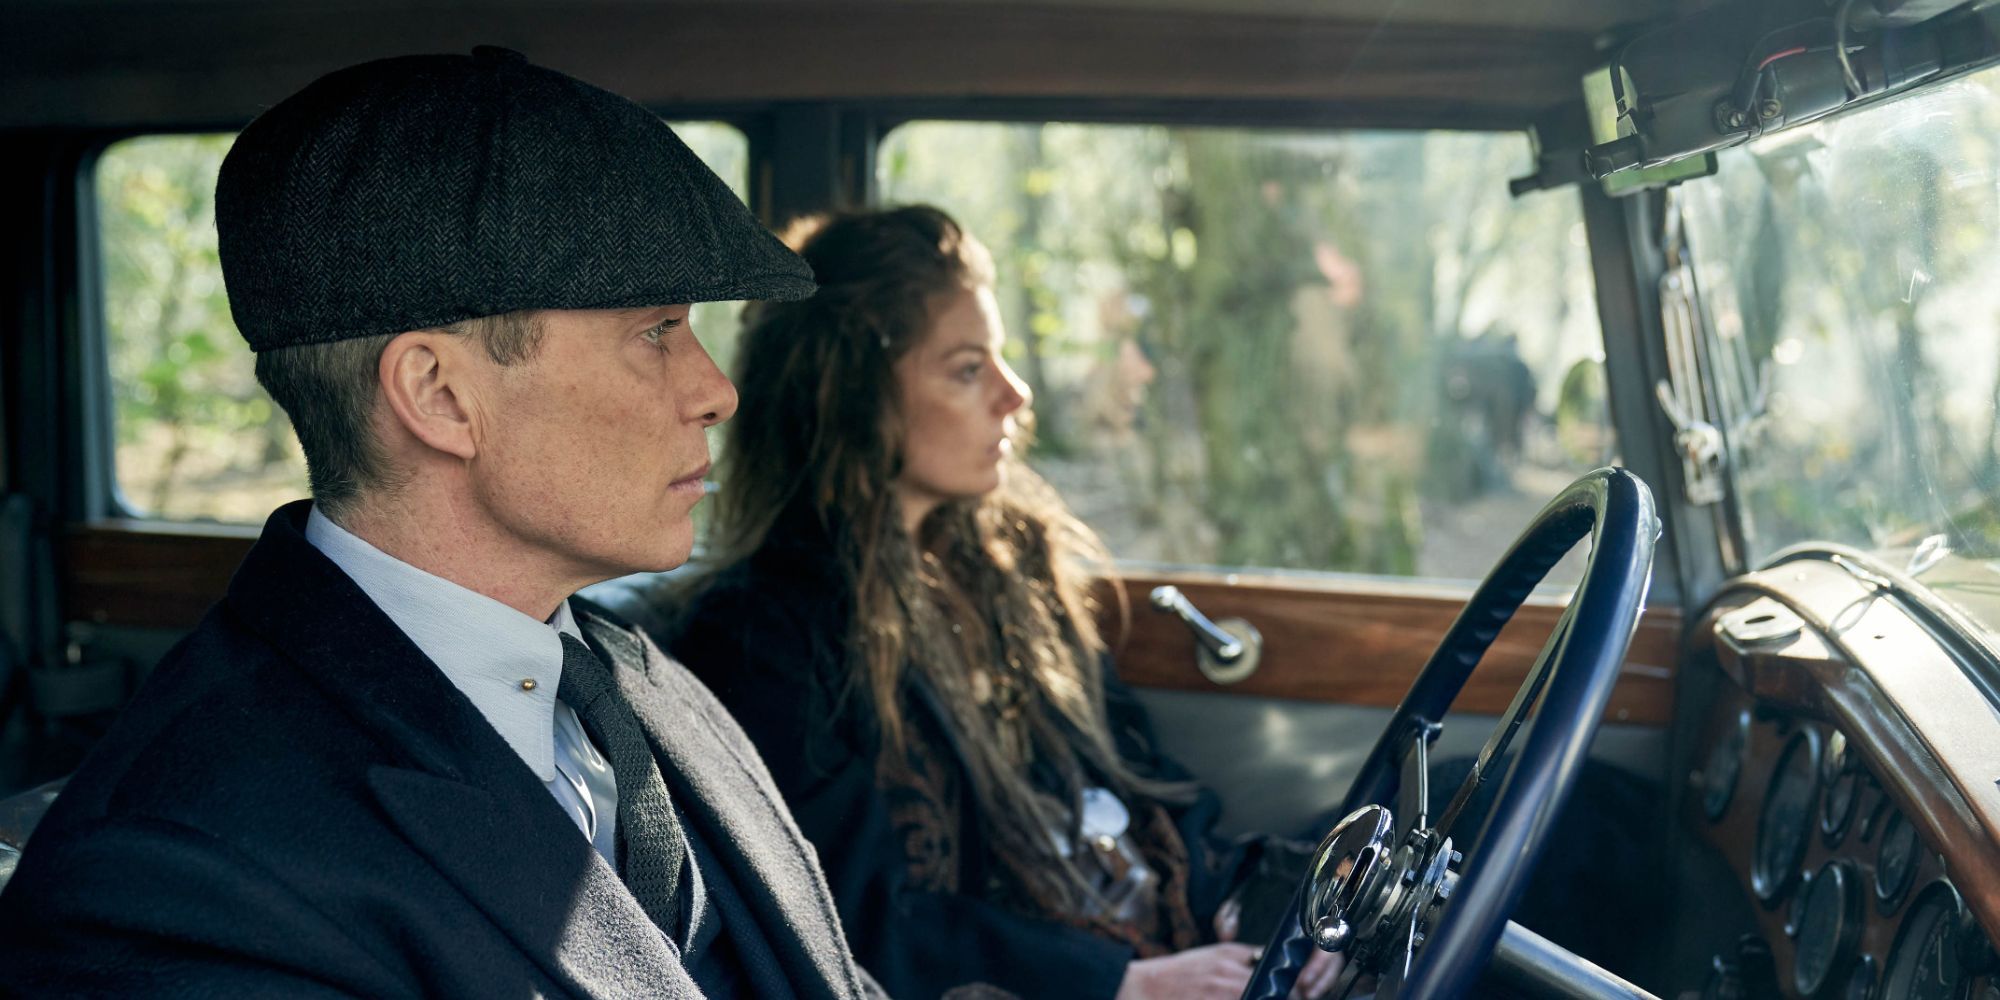 peaky blinders season 7: Peaky Blinders Season 7 update: Steven Knight  reveals details about shooting and his upcoming plans for the series - The  Economic Times